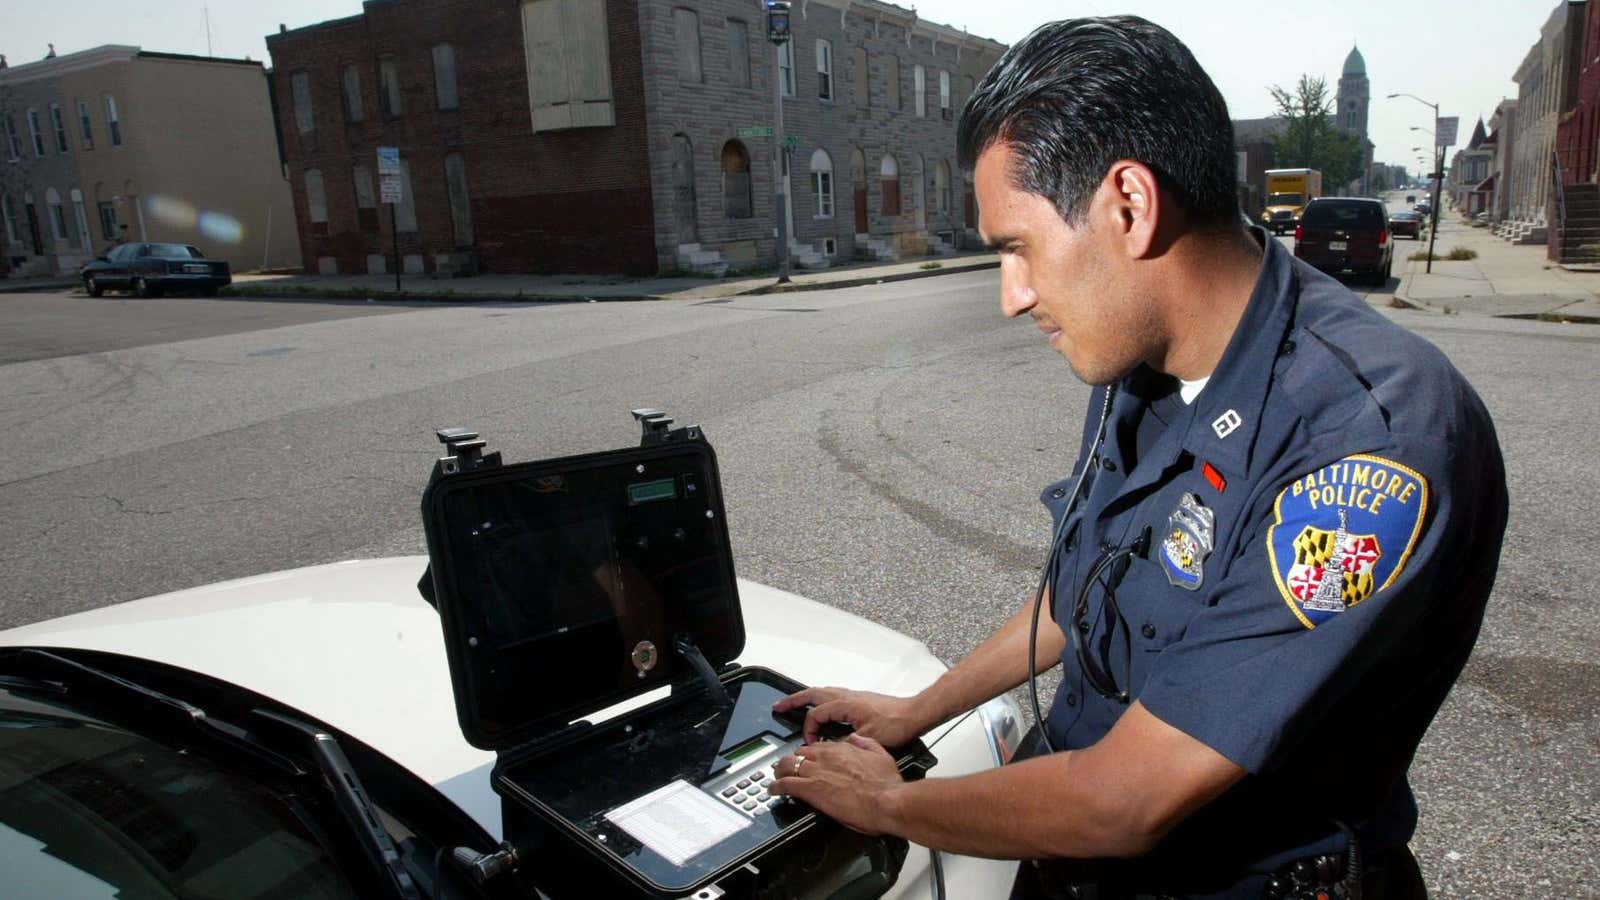 Local police have been using street light cameras for years, and now it’s DHS’ turn.